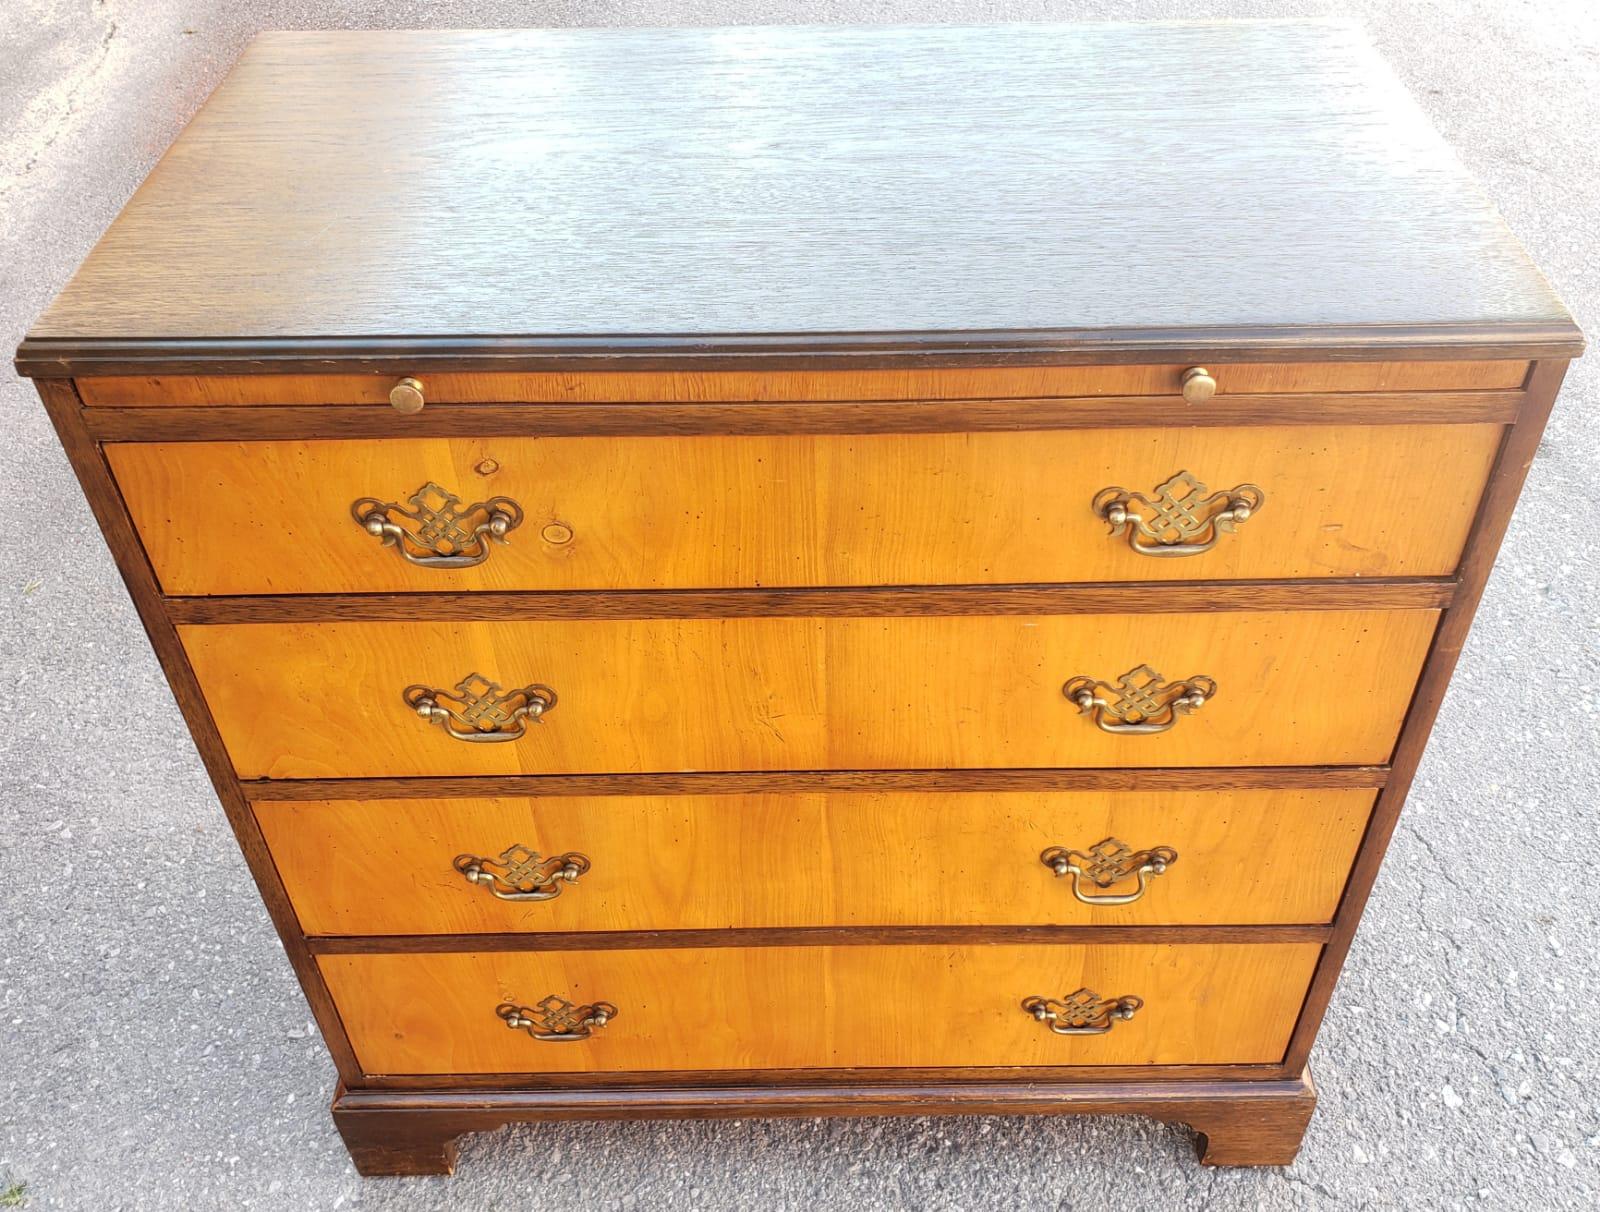 Rare 1940s Vintage Baker Furniture Satinwood and Walnut Chest With Pull Out Tray. Features 4 dovetailed drawers in smooth working condition. Comes with original hardware. Dark walnut sides and top. Satinwood front. Very good condition.
Measures